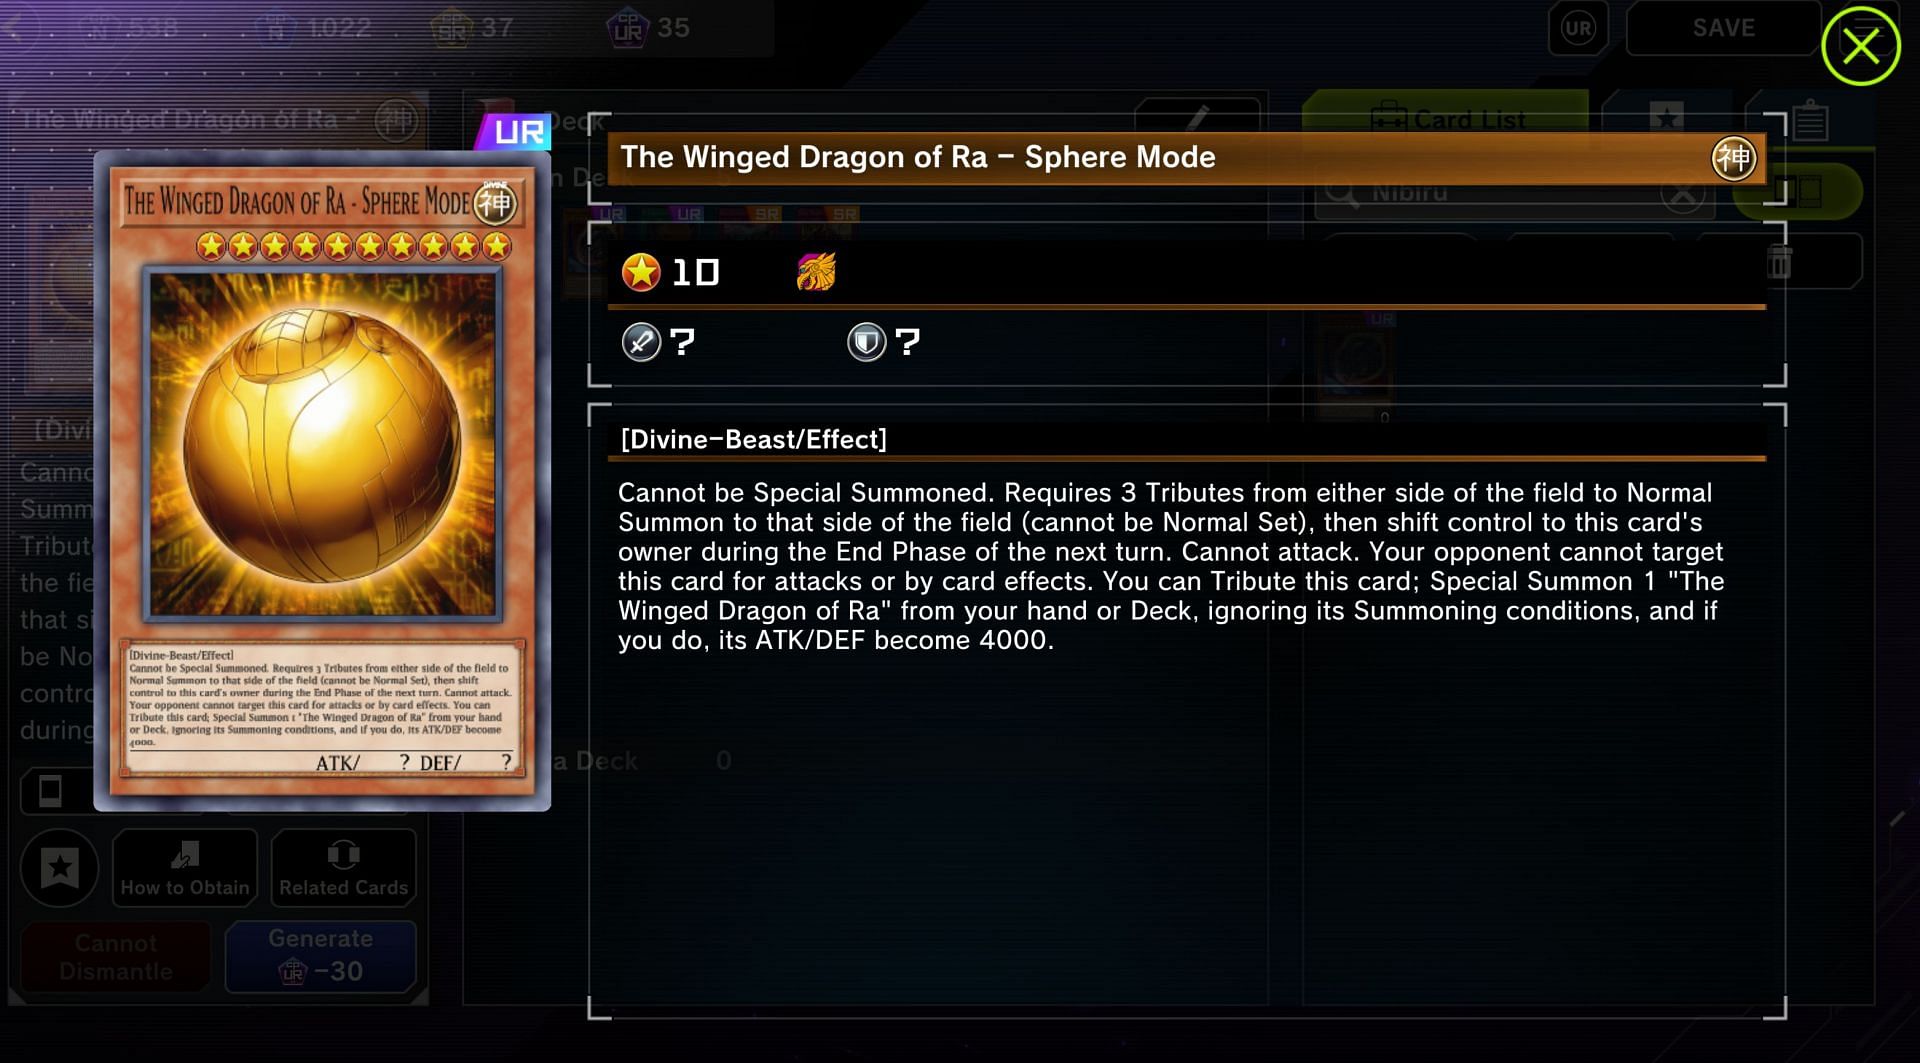 If done early, this can grind a Tri-Brigade deck to a halt in Yu-Gi-Oh! Master Duel (Image via Konami)